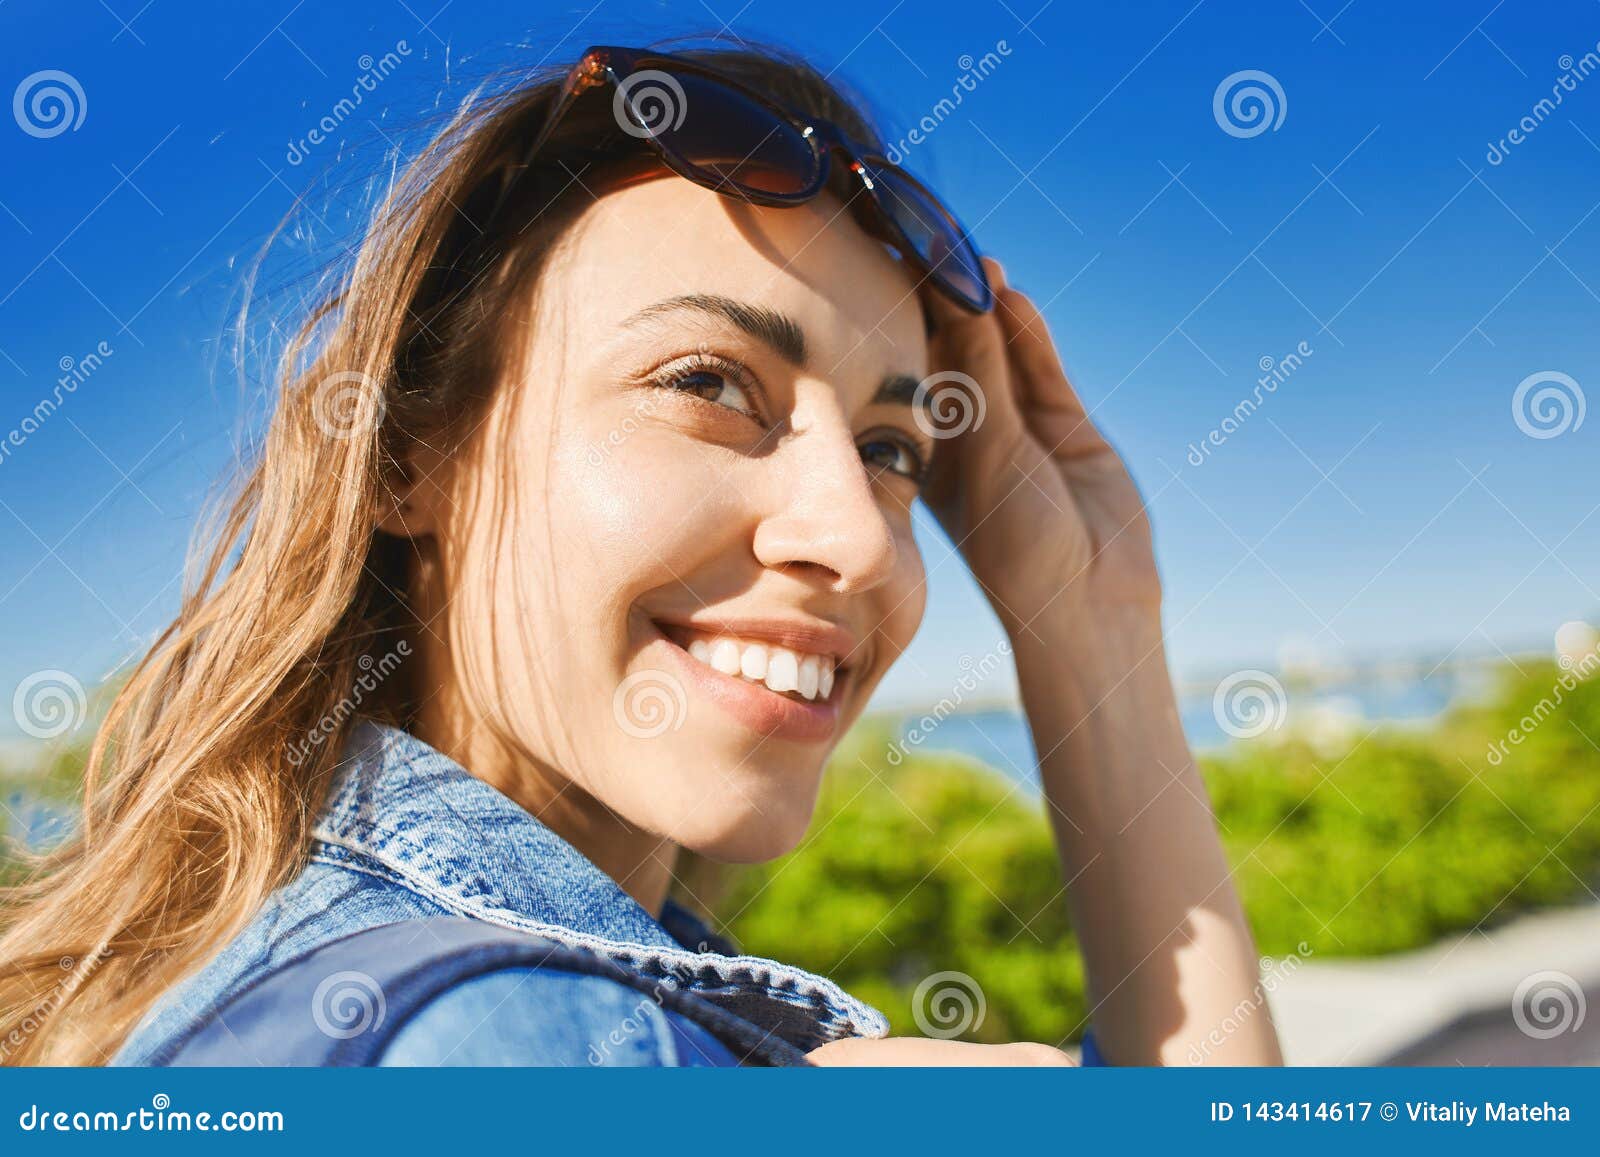 Portrait Of A Young Smiling Attractive Woman With Sunglasses At Sunny Day On The Blue Sky 